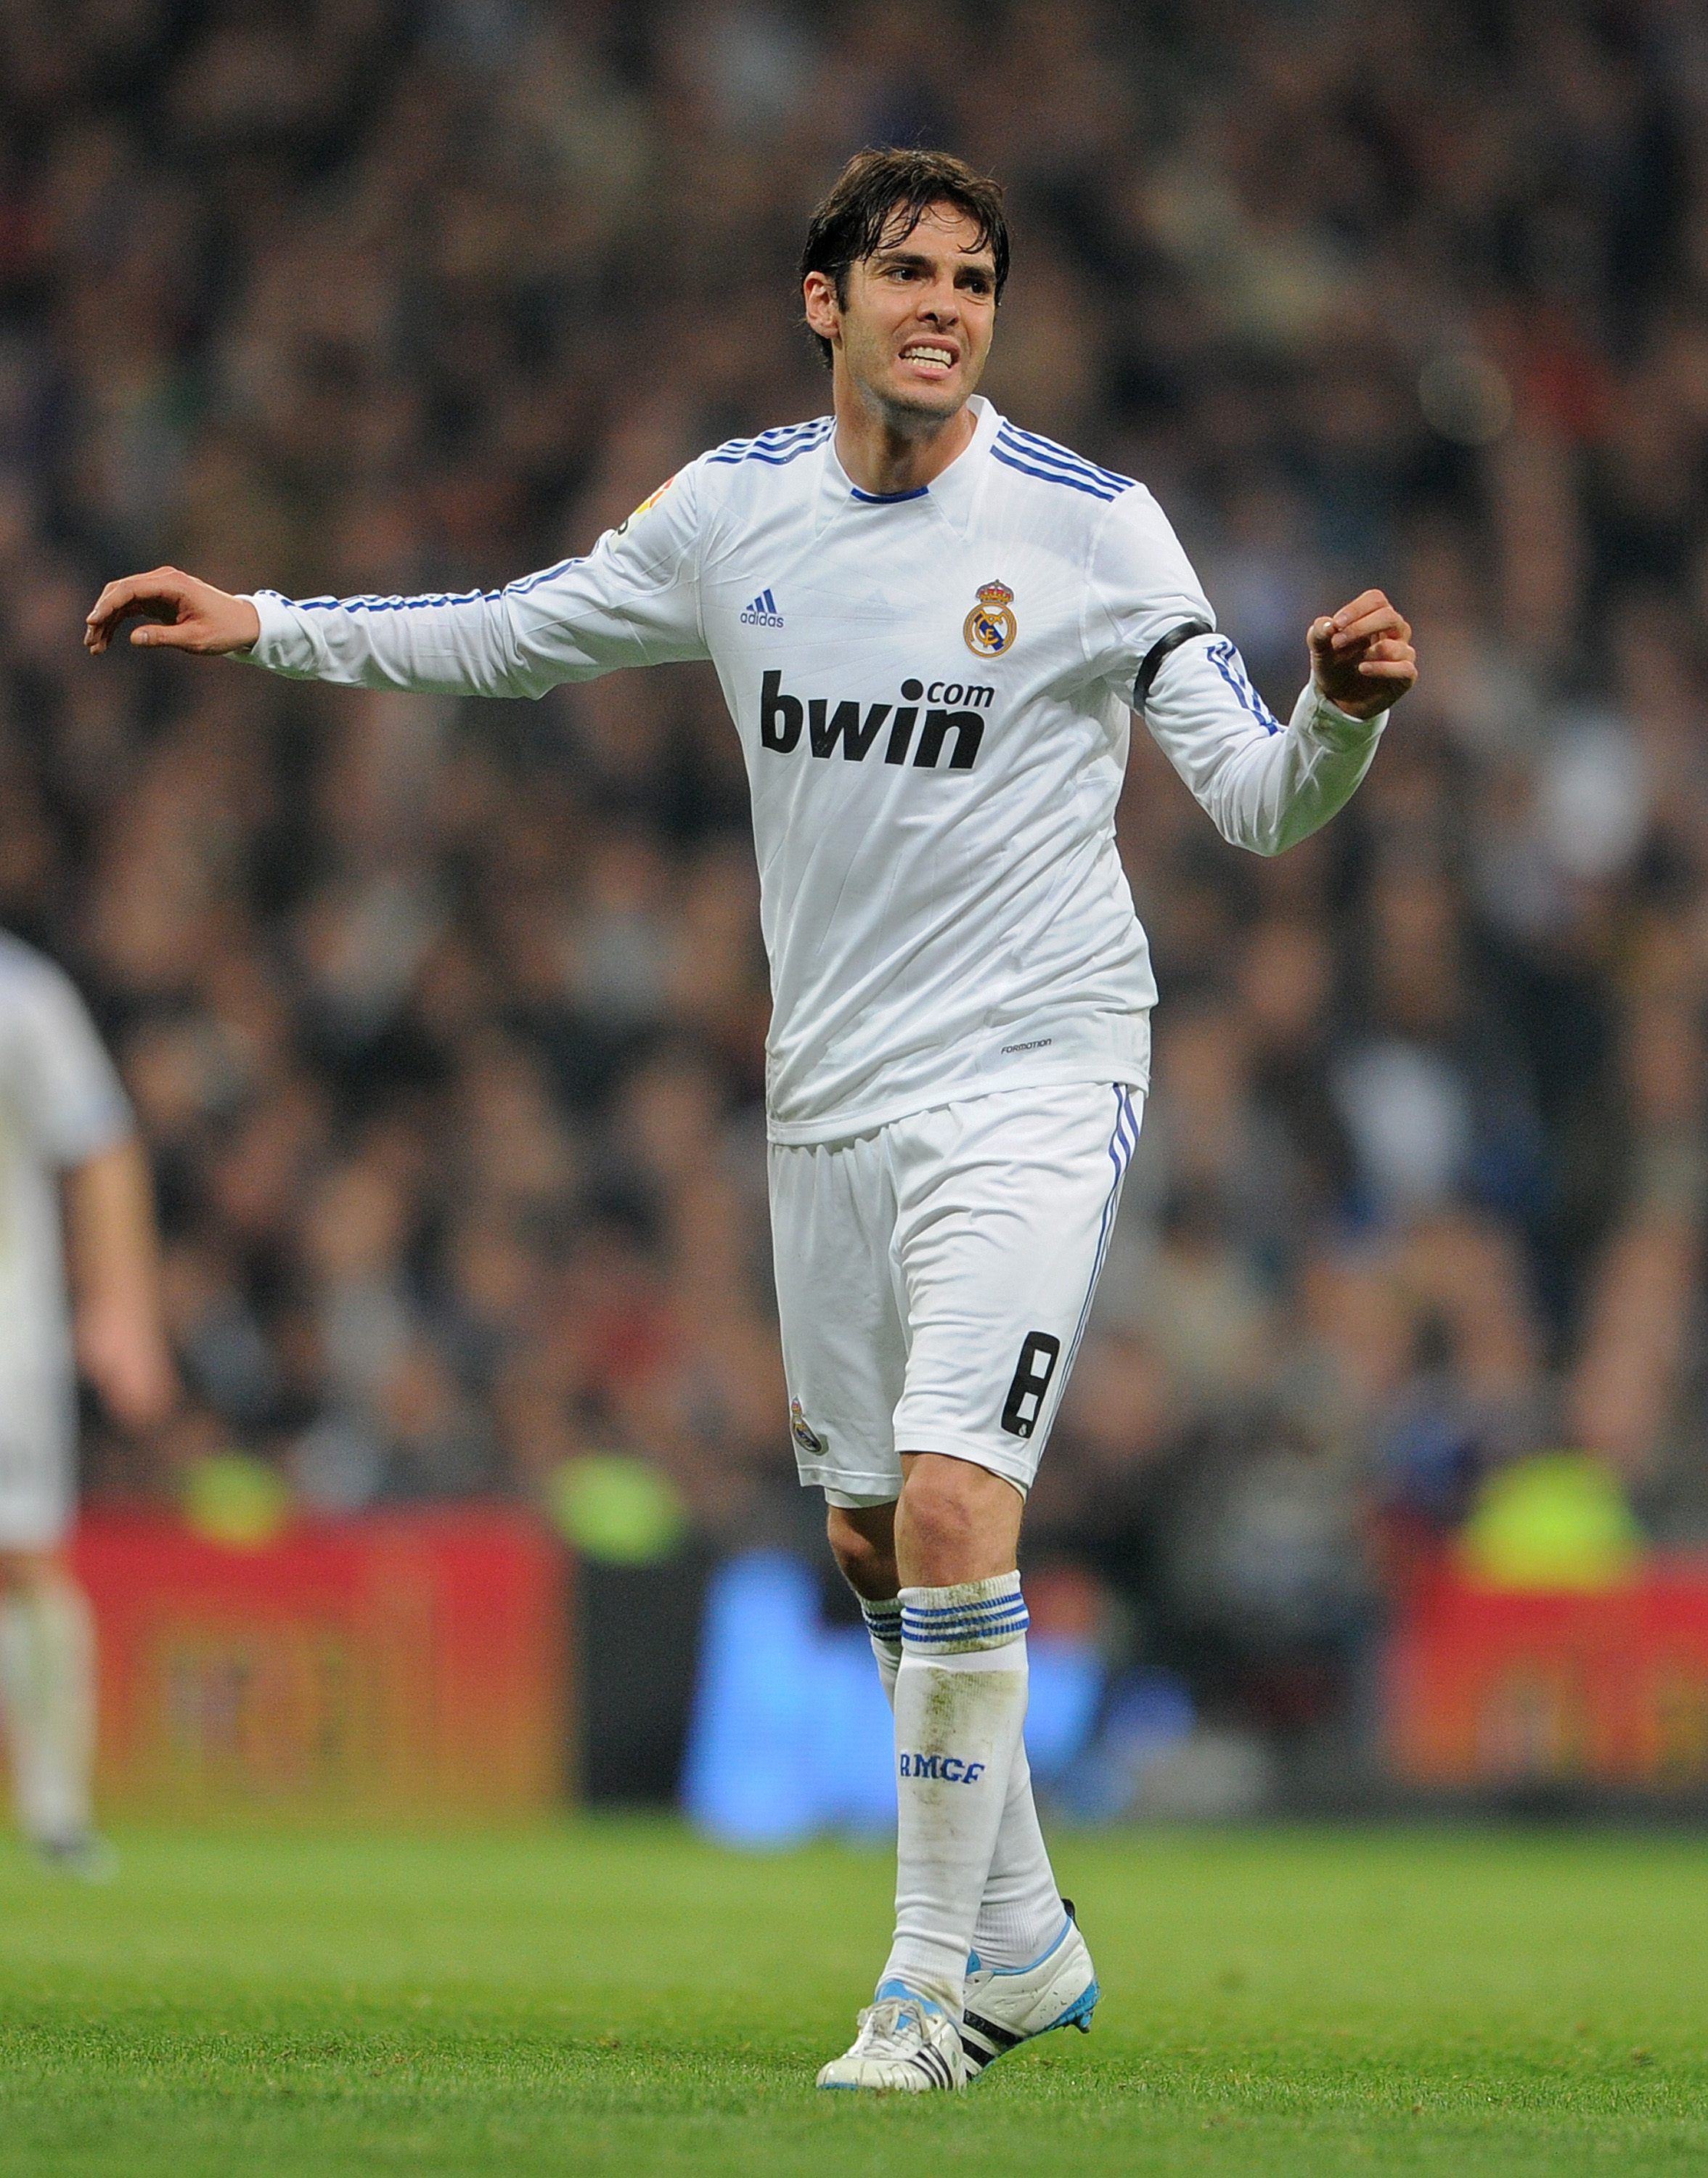 MADRID, SPAIN - JANUARY 13:  Kaka of Real Madrid reacts during the quarter-final Copa del Rey first leg match between Real Madrid and Atletico Madrid at Estadio Santiago Bernabeu on January 13, 2011 in Madrid, Spain.  (Photo by Jasper Juinen/Getty Images)